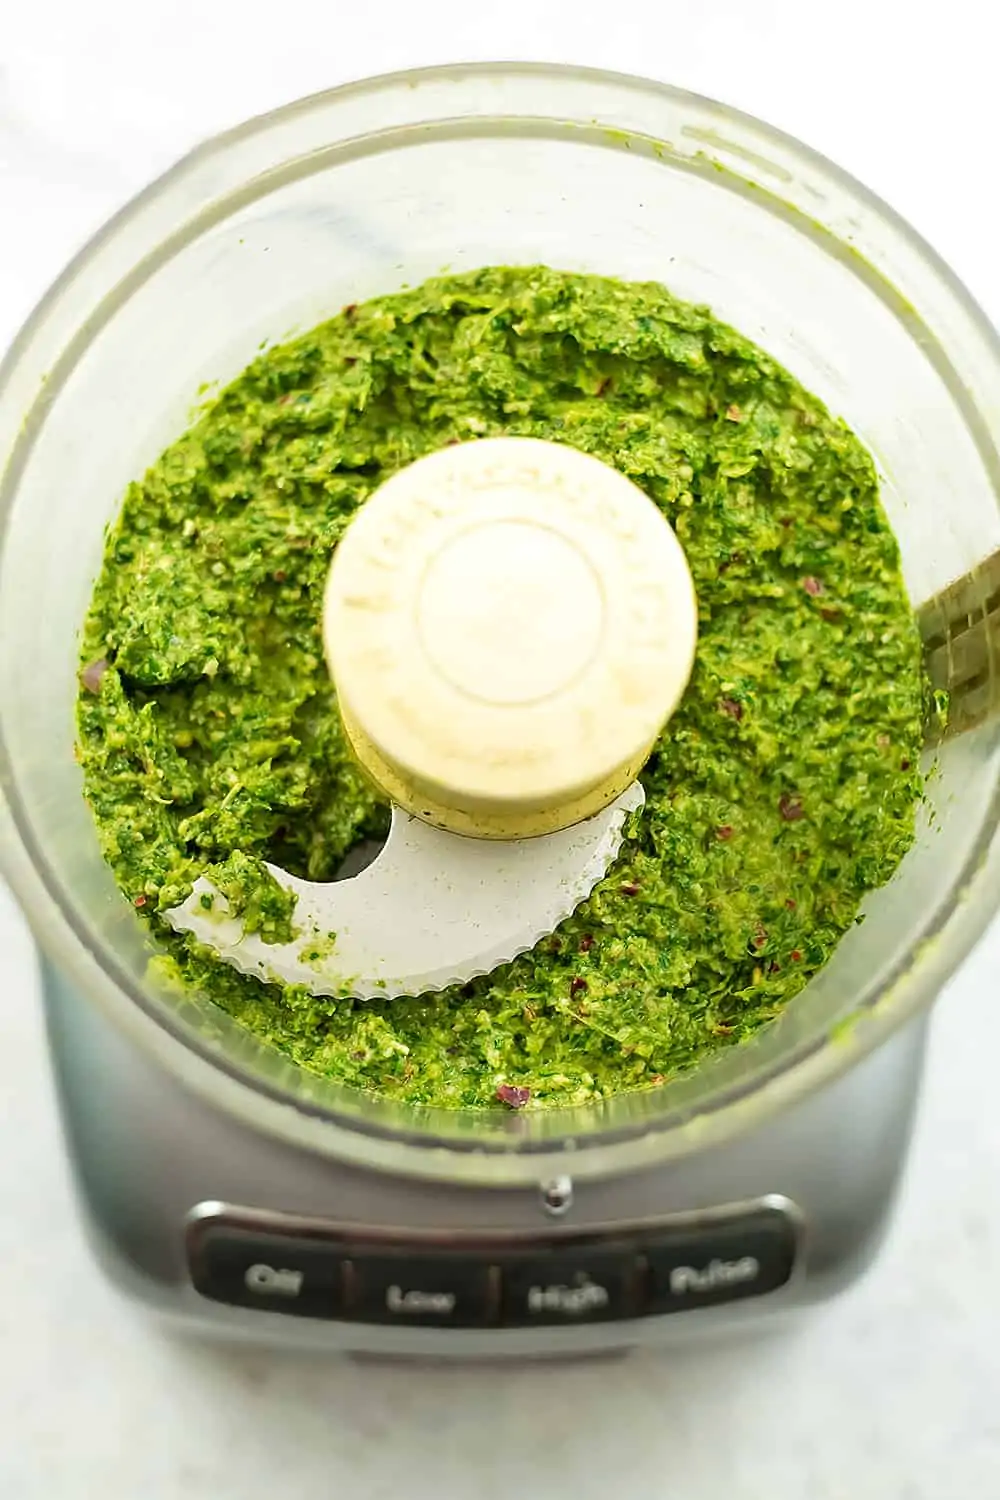 Chimichurri sauce after blending in the food processor.